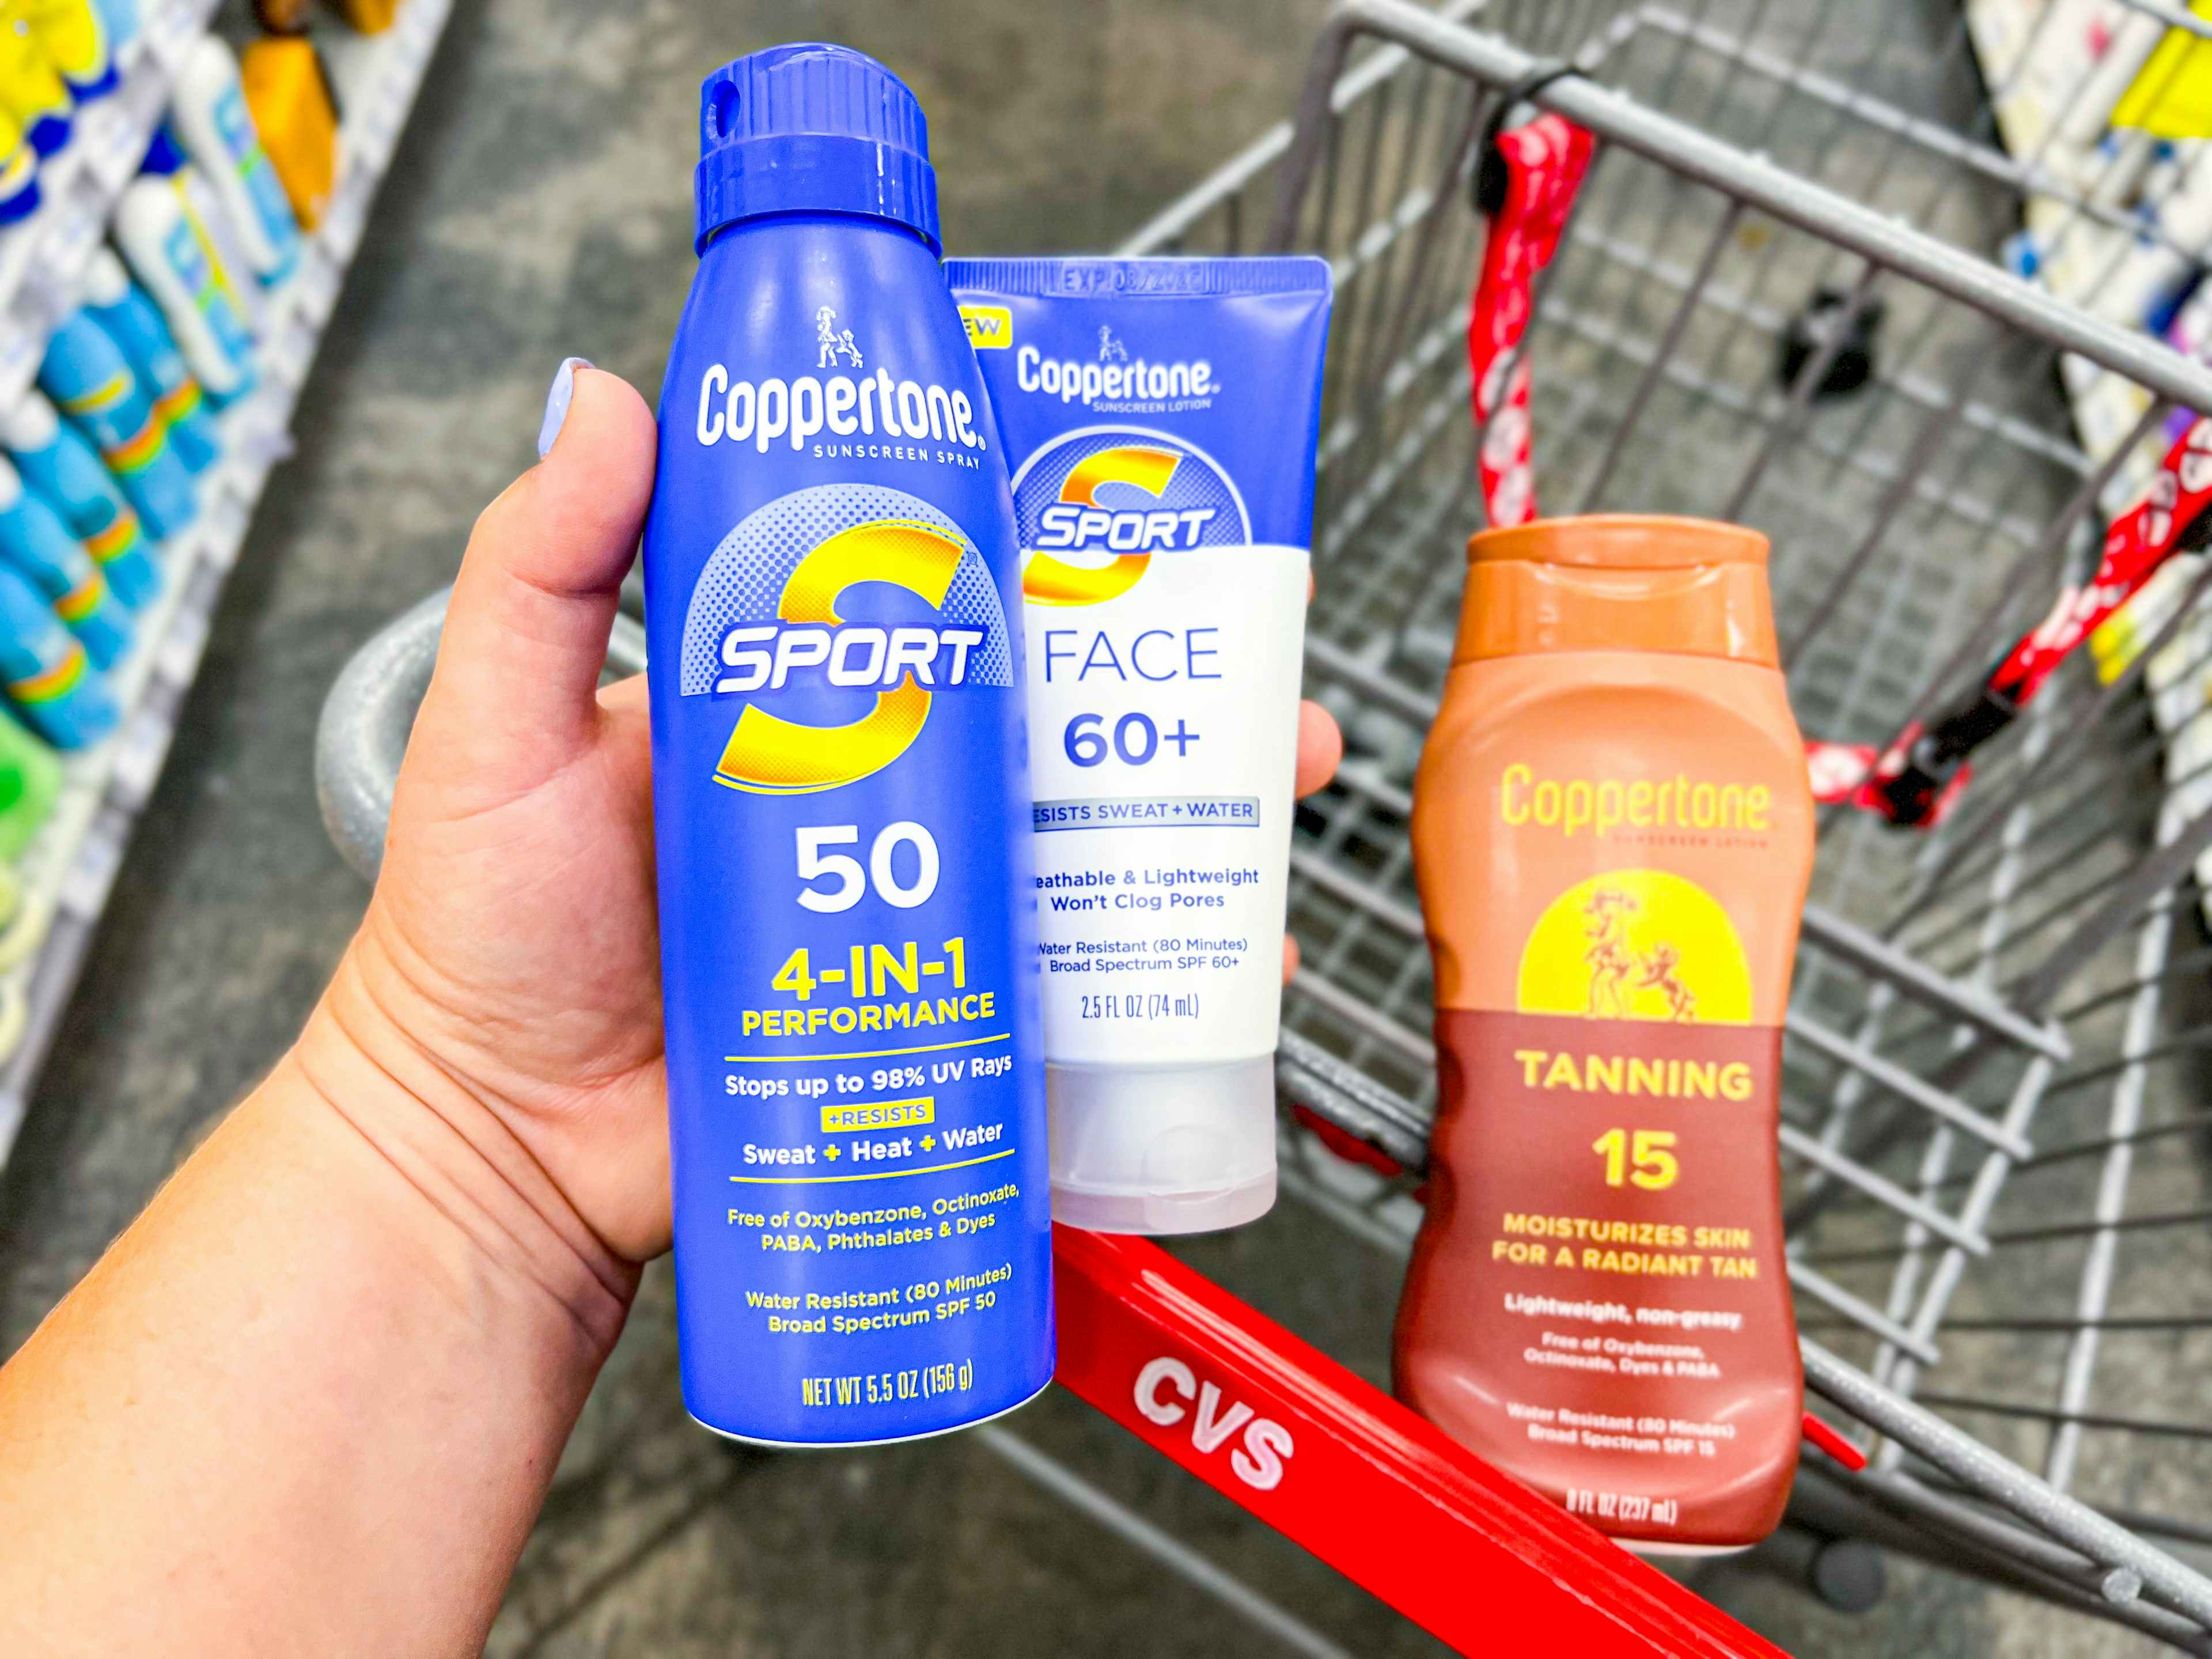 cvs coppertone sunscreen spray face and tanning lotion6010